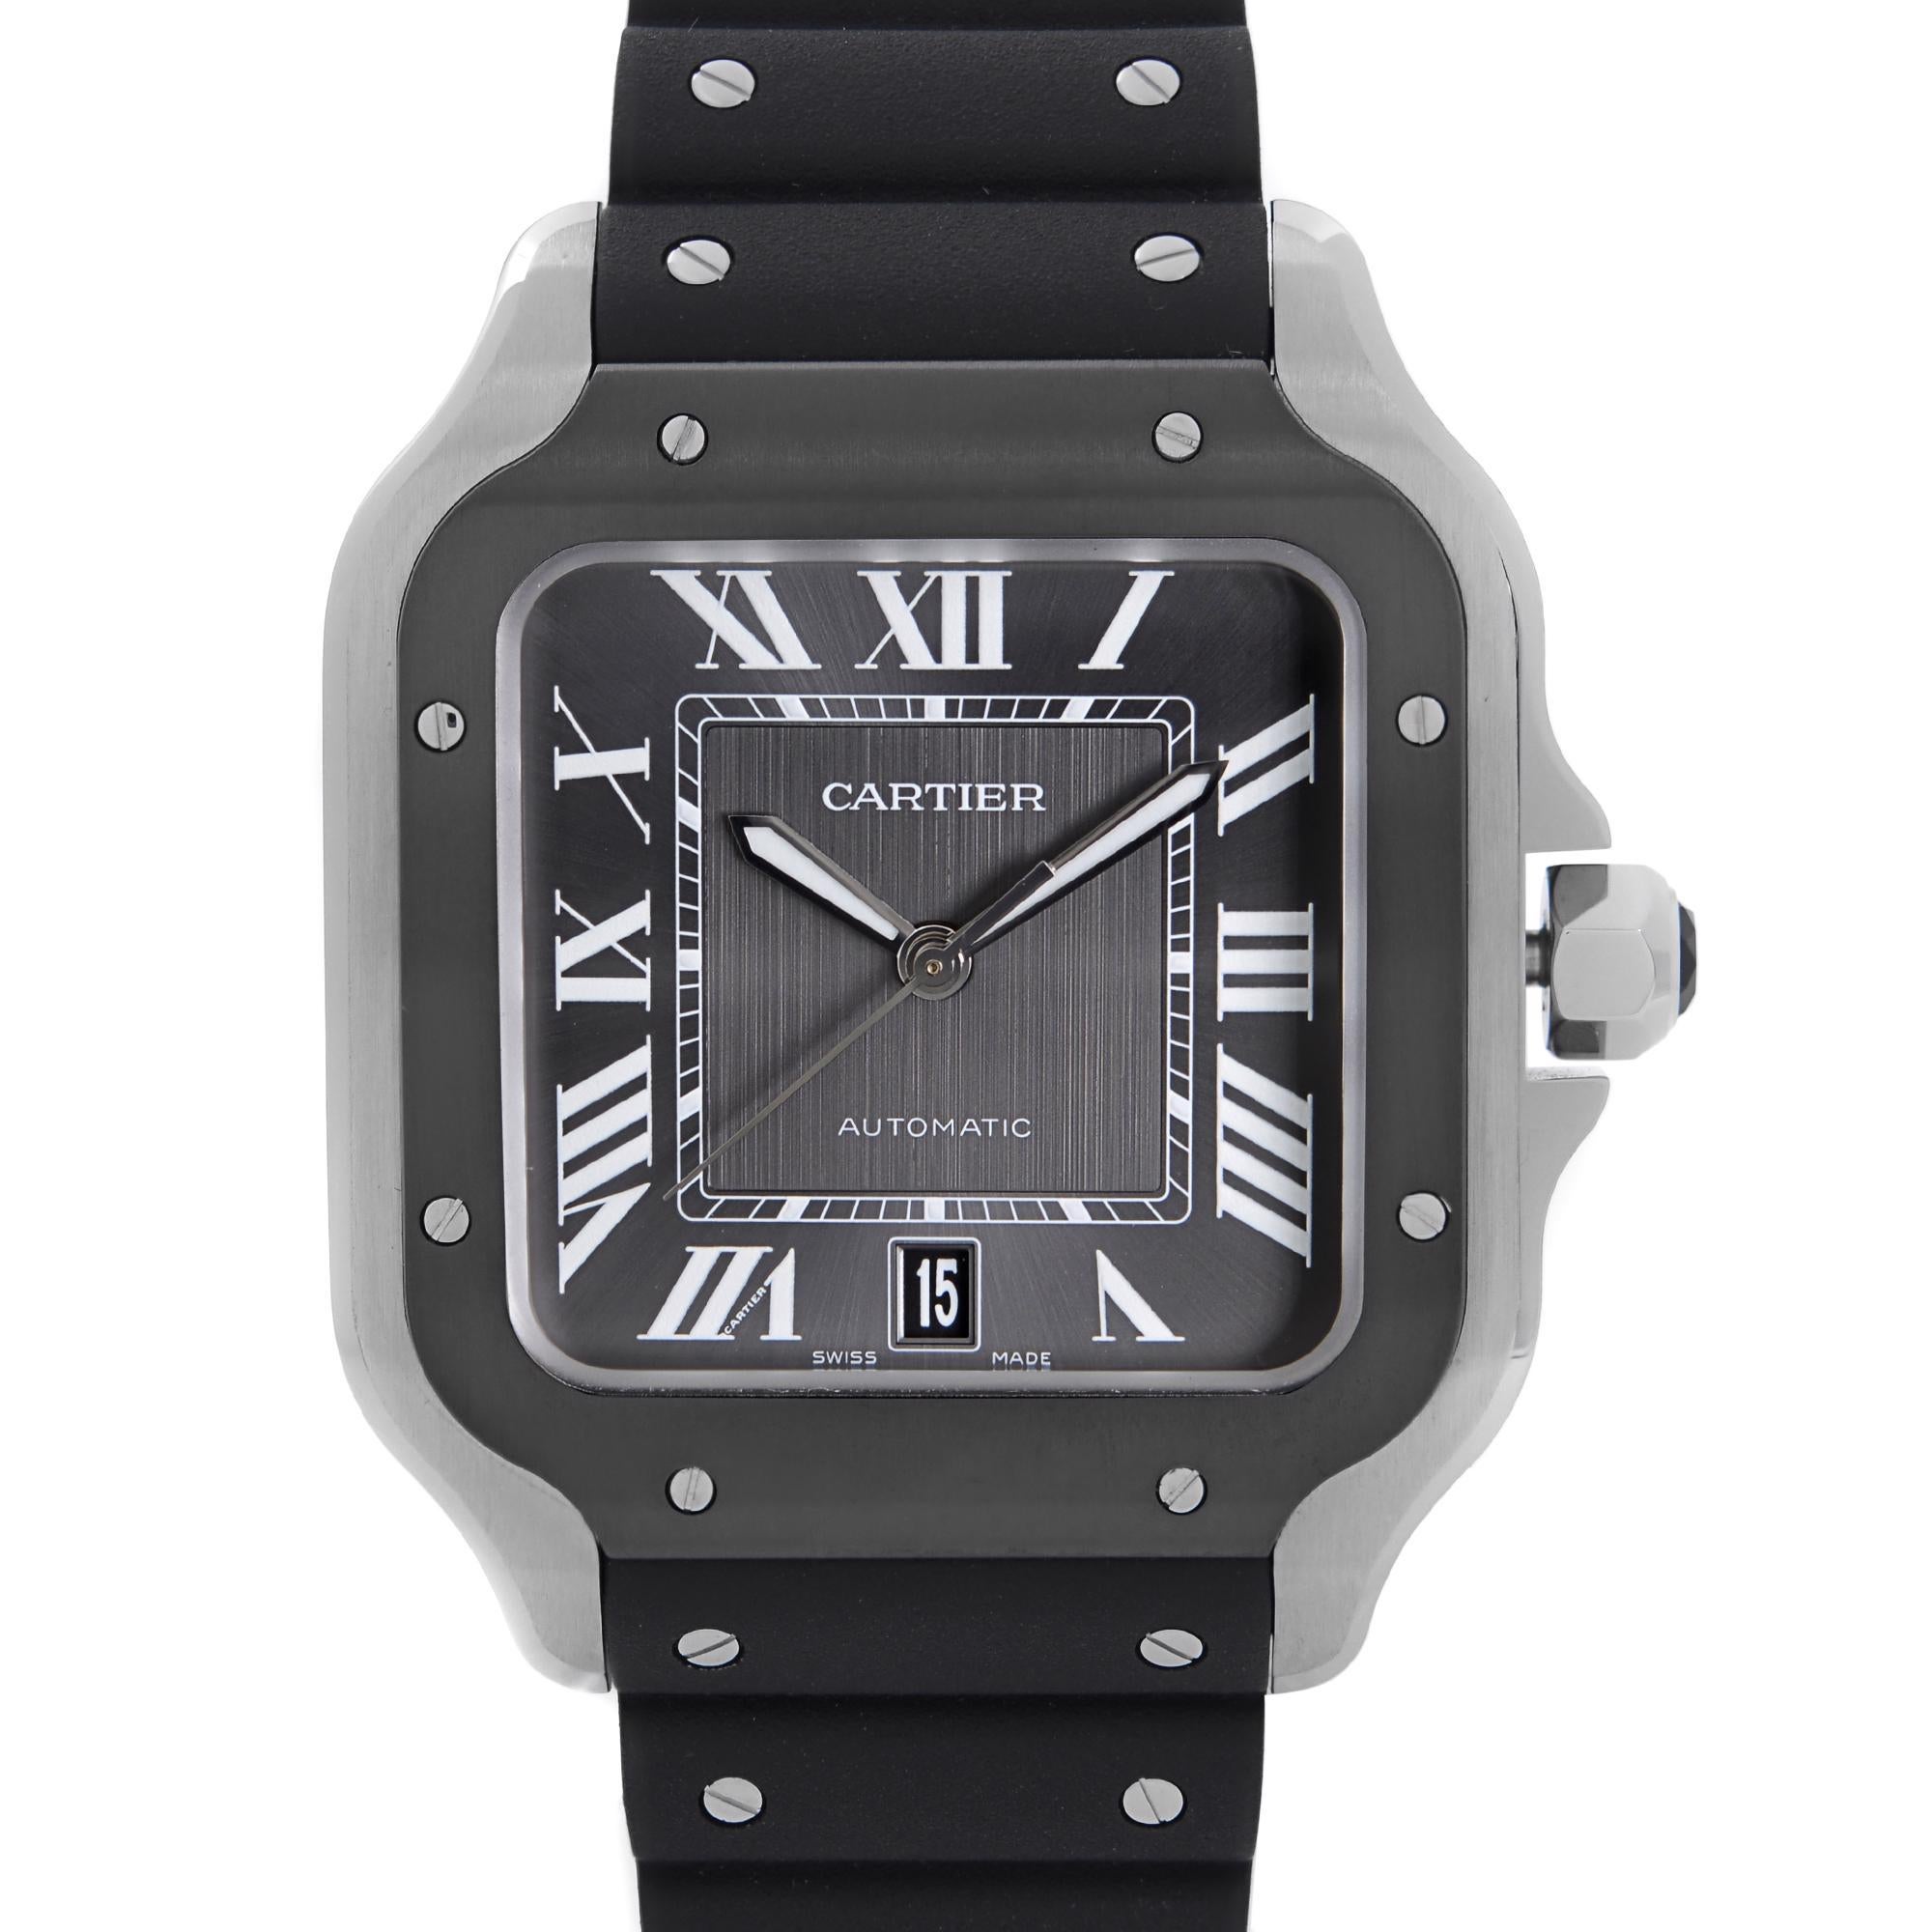 Display Model Cartier Santos De Cartier Large Steel Gray Dial Automatic Men's Watch WSSA0037. Missing Steel bracelet.  This Beautiful Timepiece is Powered by Mechanical (Automatic) Movement And Features: Rectangular Stainless Steel Case With a Gray